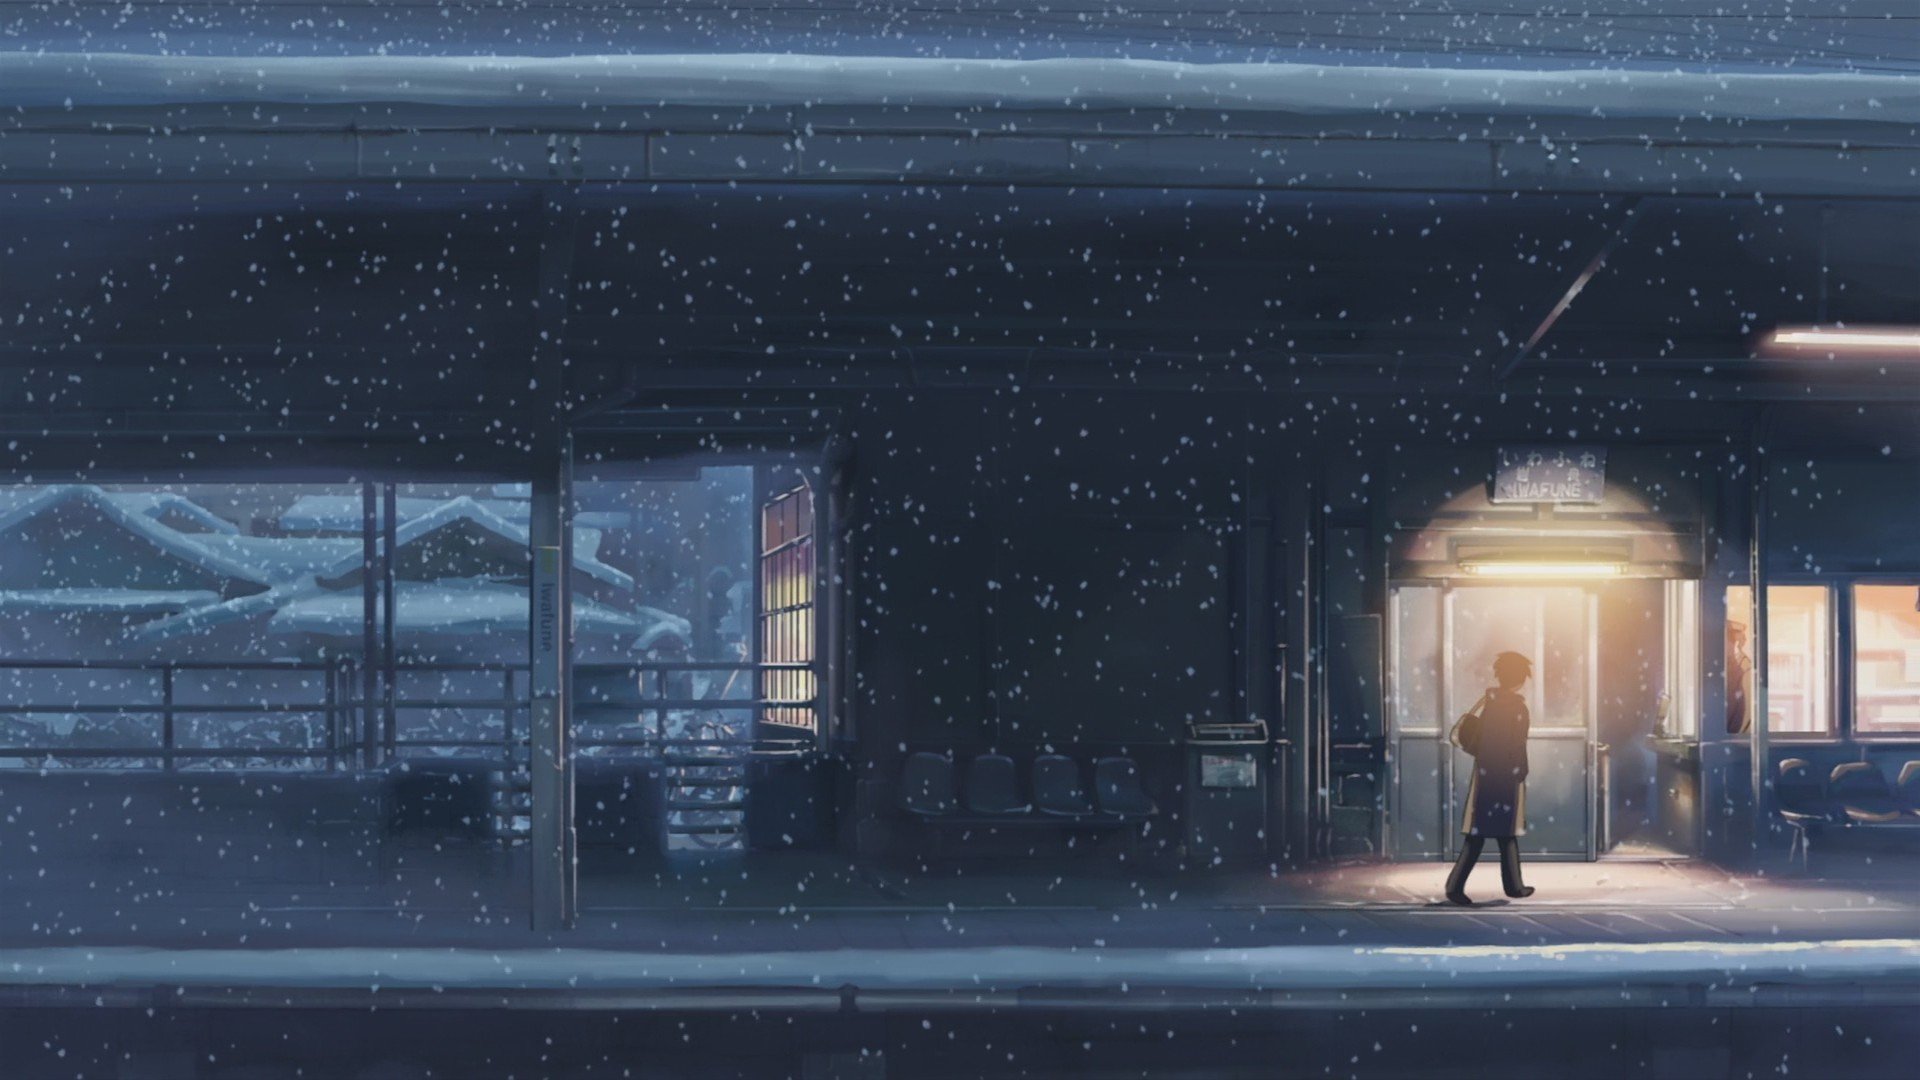 Centimeters, Per, Second, The, Train, Station, Snow, Japan Wallpaper HD / Desktop and Mobile Background